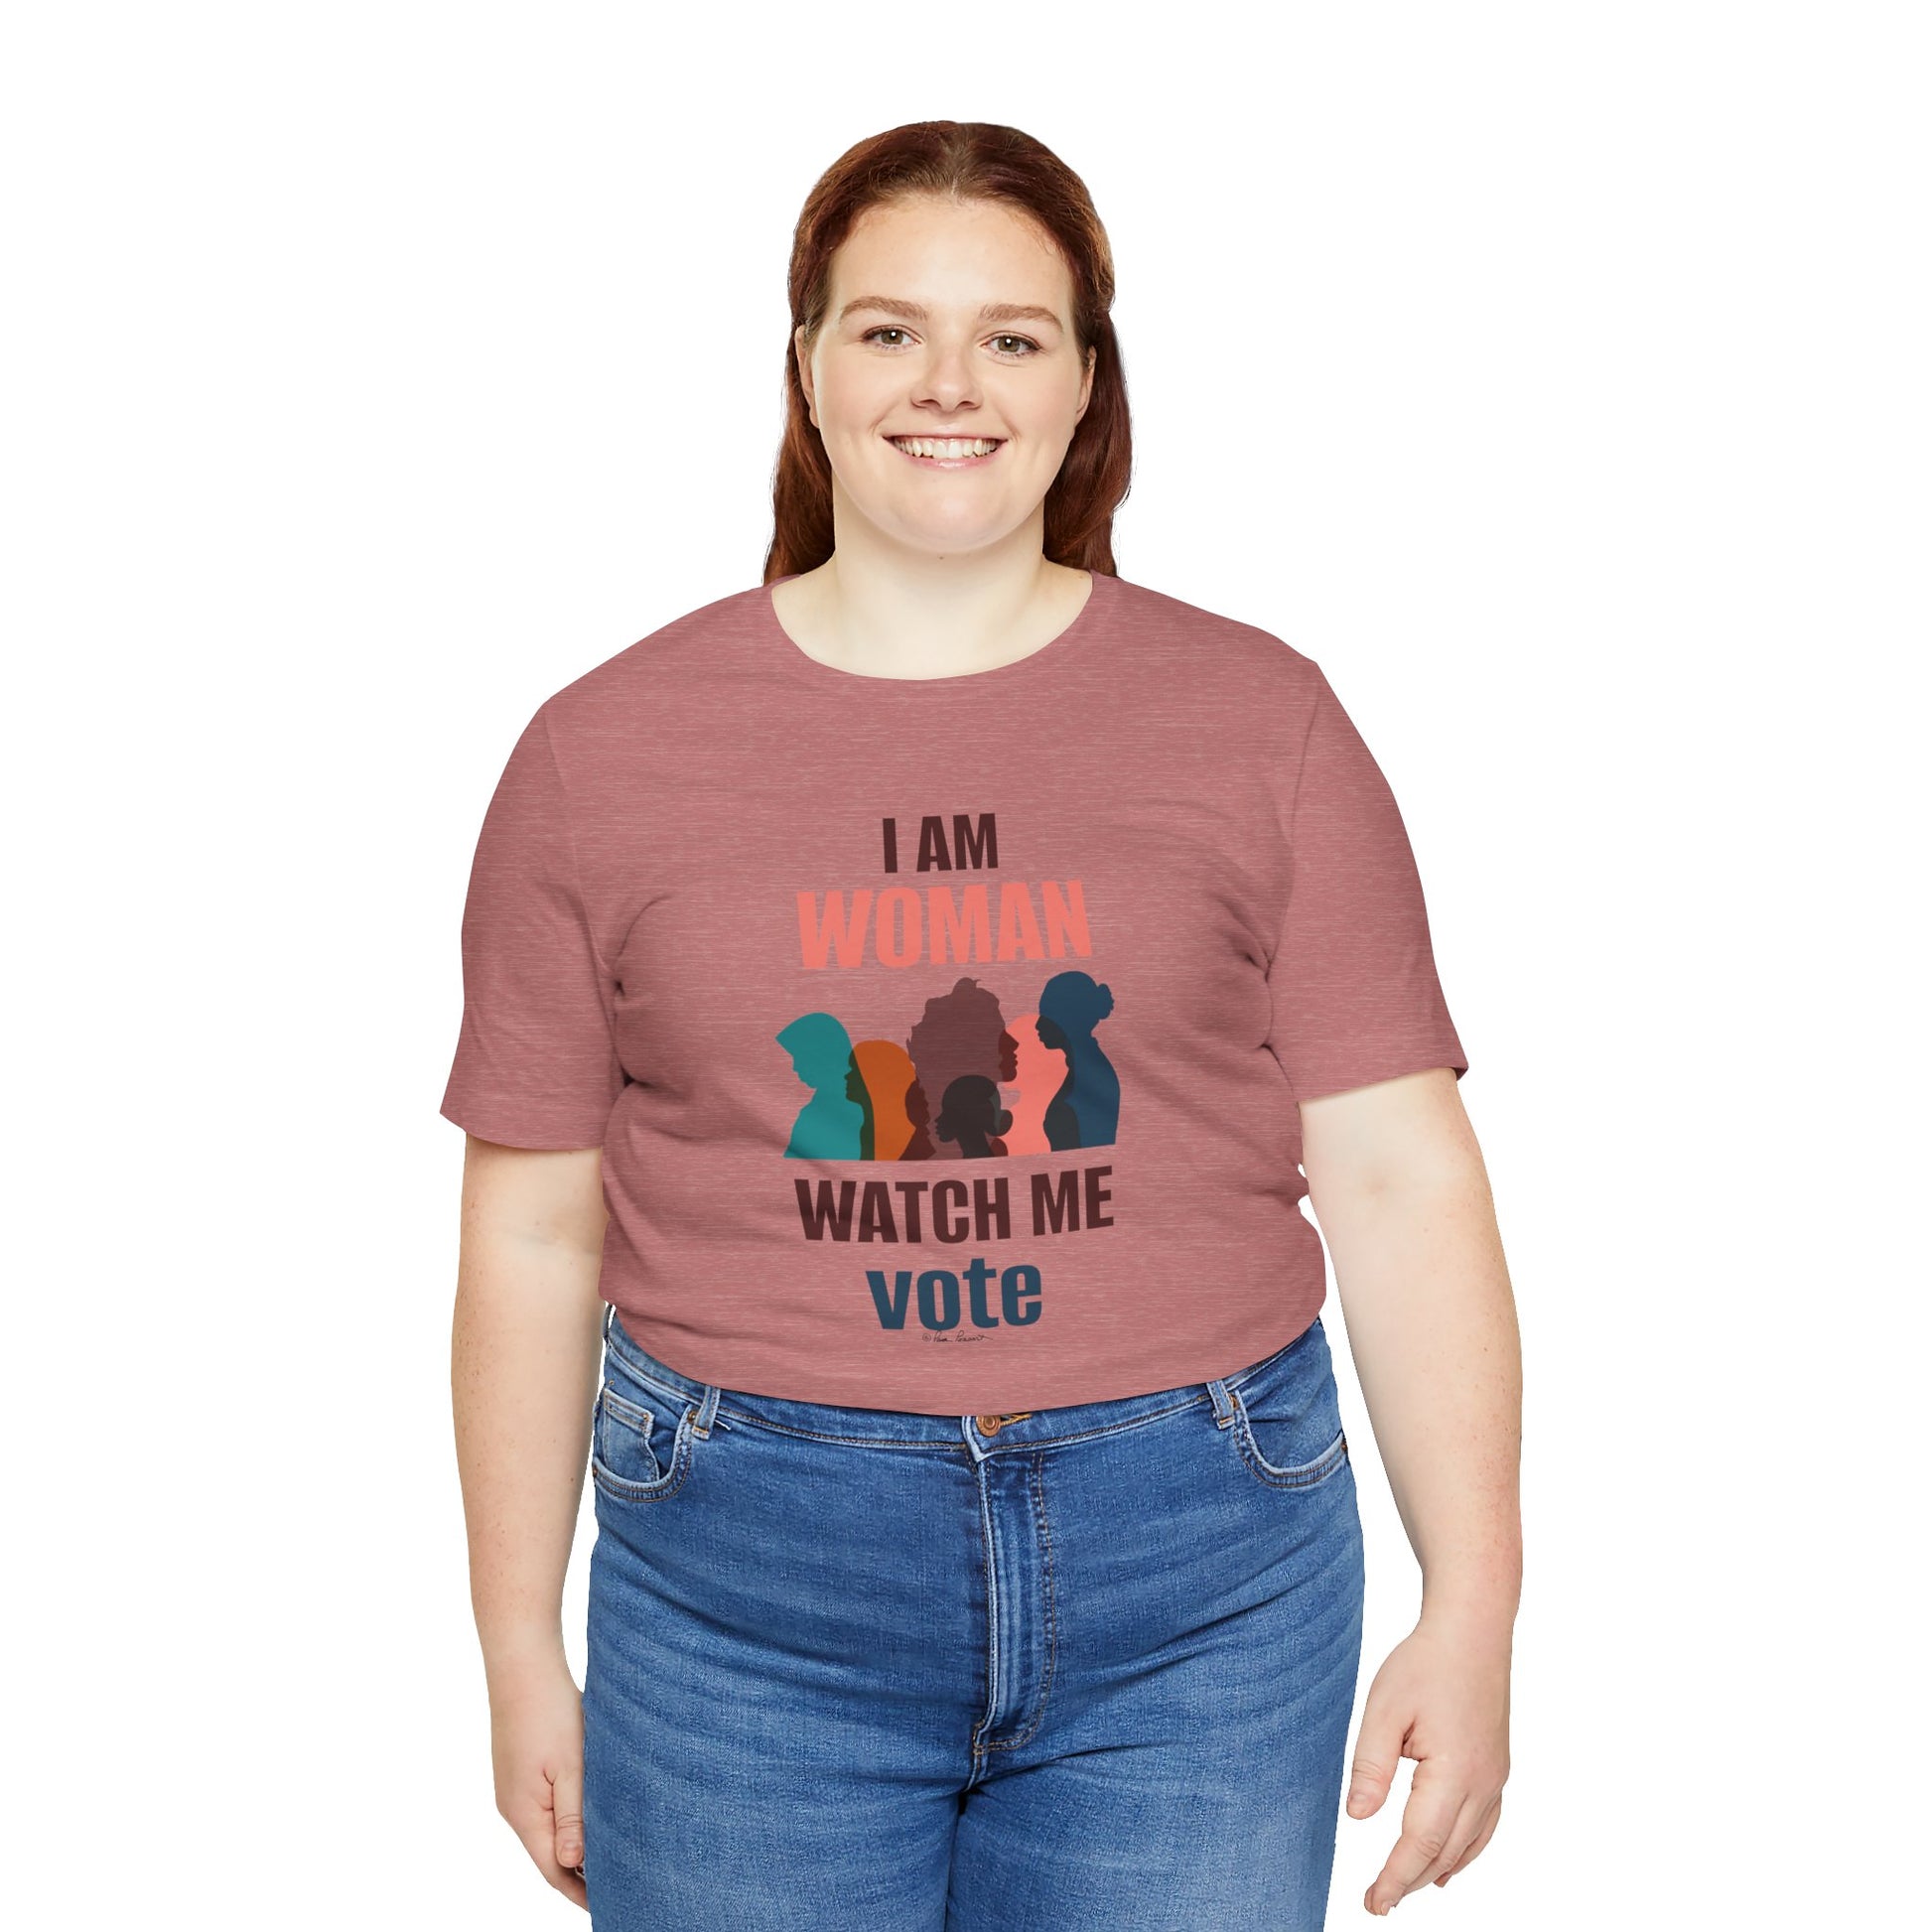 Woman in a red Voting Women's t-shirt by Printify with "i am woman watch me vote" and silhouette graphics, smiling, standing against a white background.